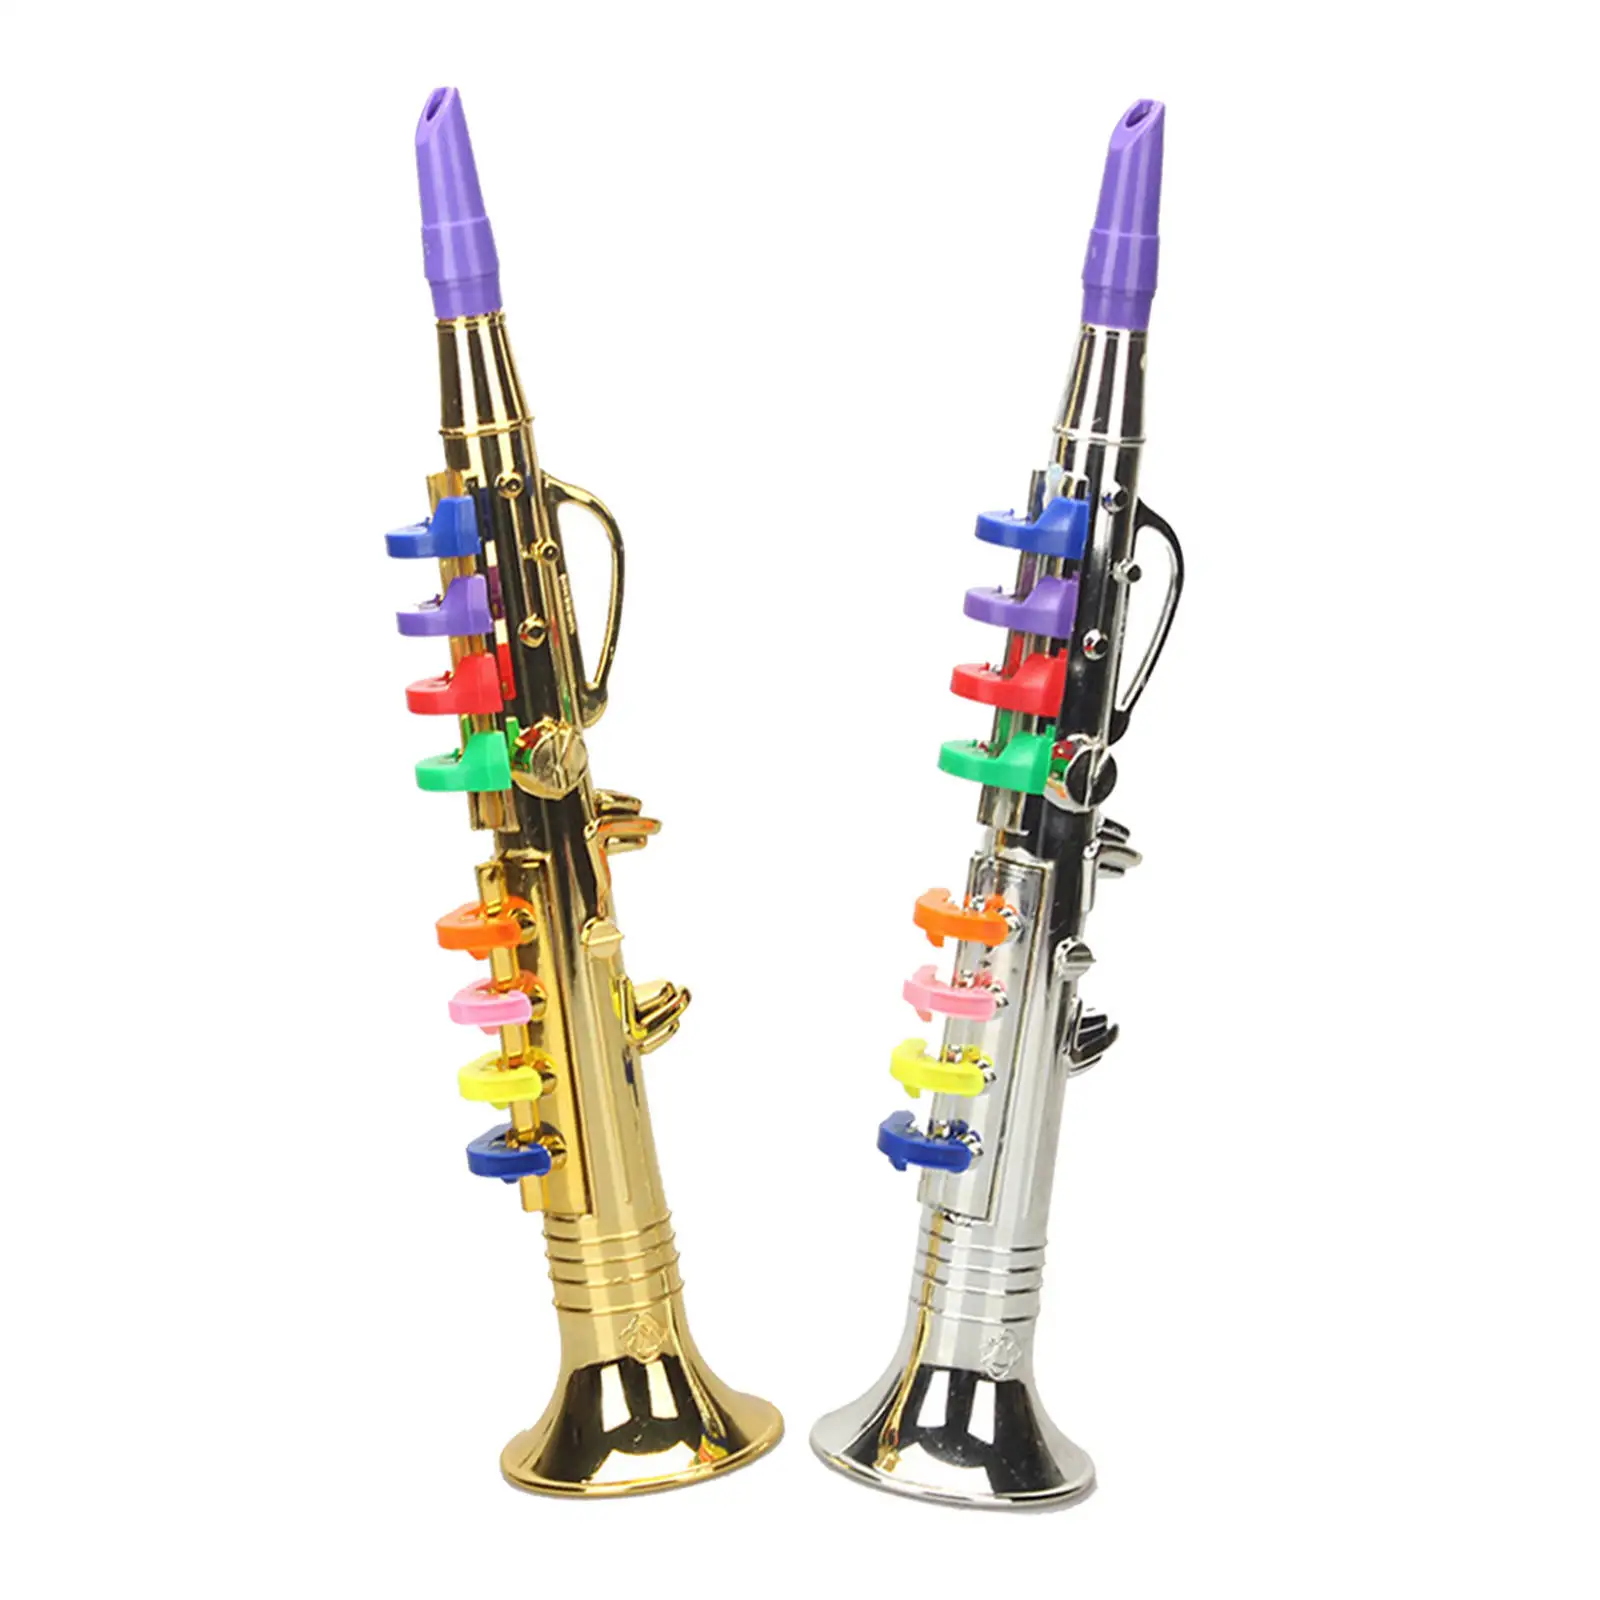 Kids Saxophone Trumpet Clarinet Child Gift Saxophone Musical Toys Music Playing Tool Simulation instrument With 8 Colored Keys